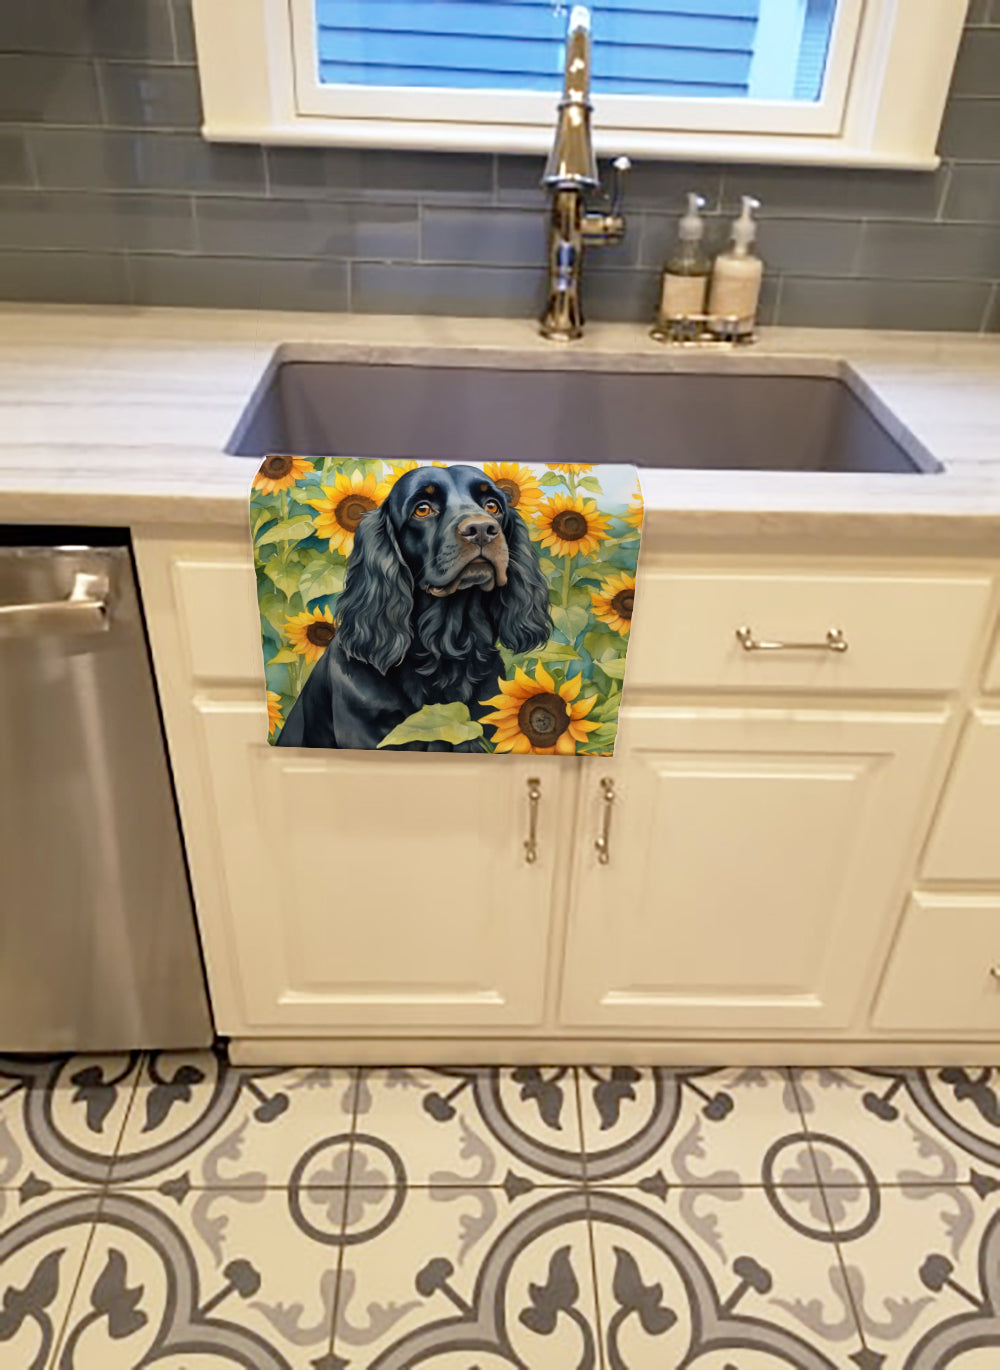 Buy this Cocker Spaniel in Sunflowers Kitchen Towel